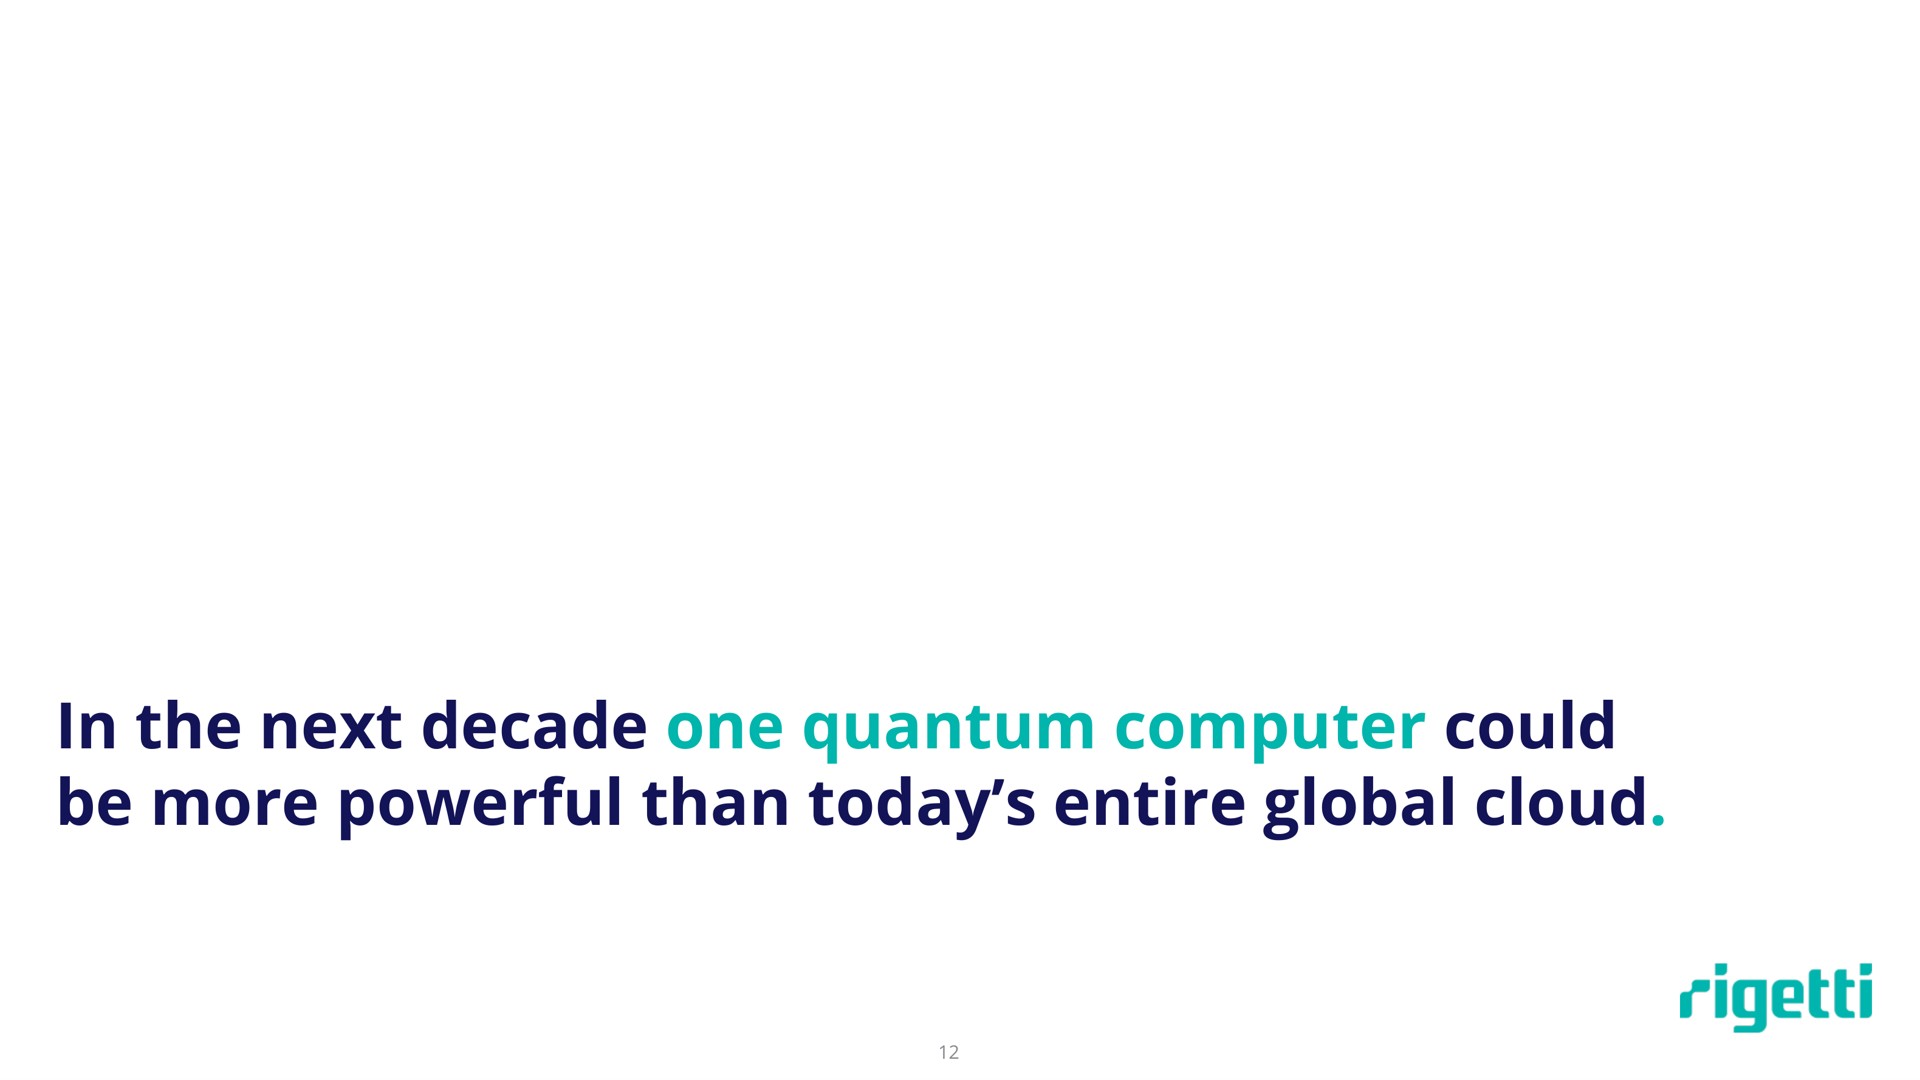 in the next decade one quantum computer could be more powerful than today entire global cloud | Rigetti